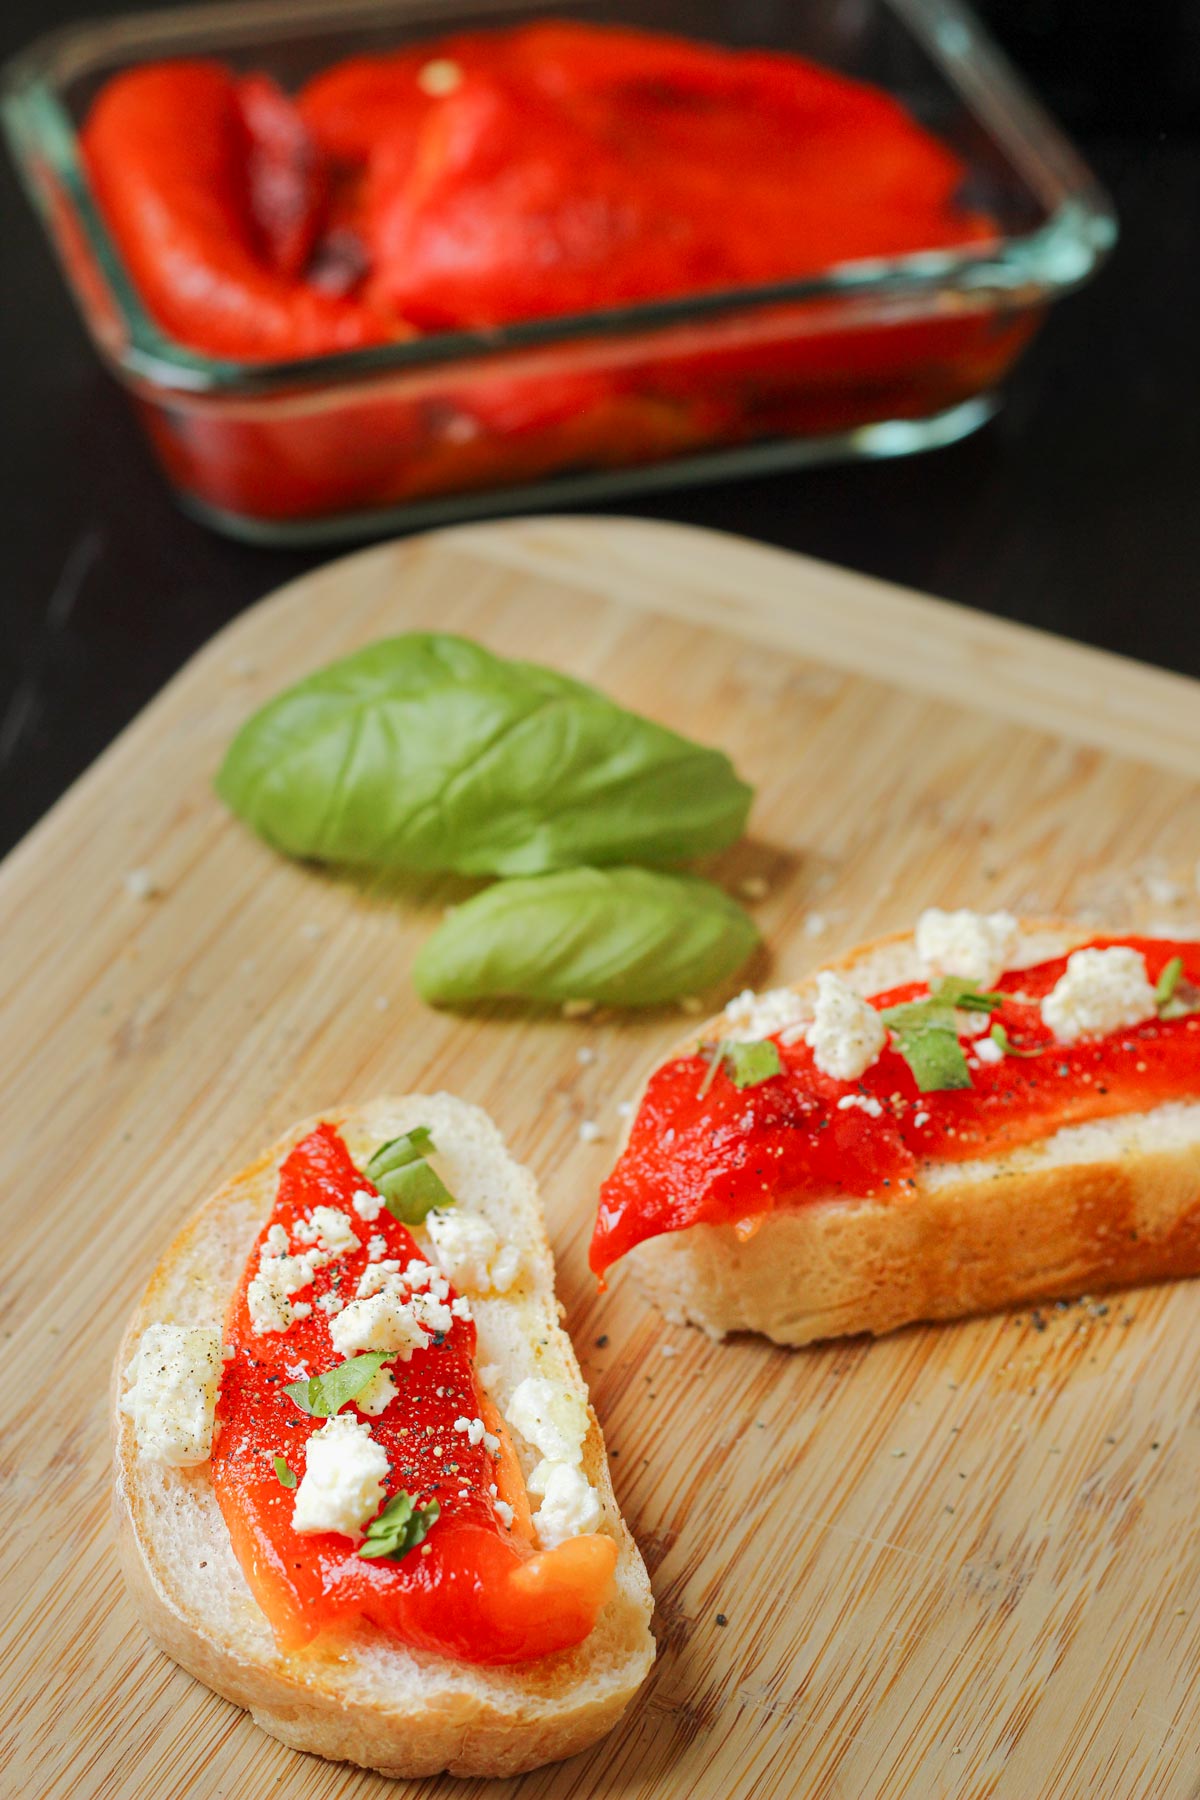 roasted red pepper in a dish and on crostini.